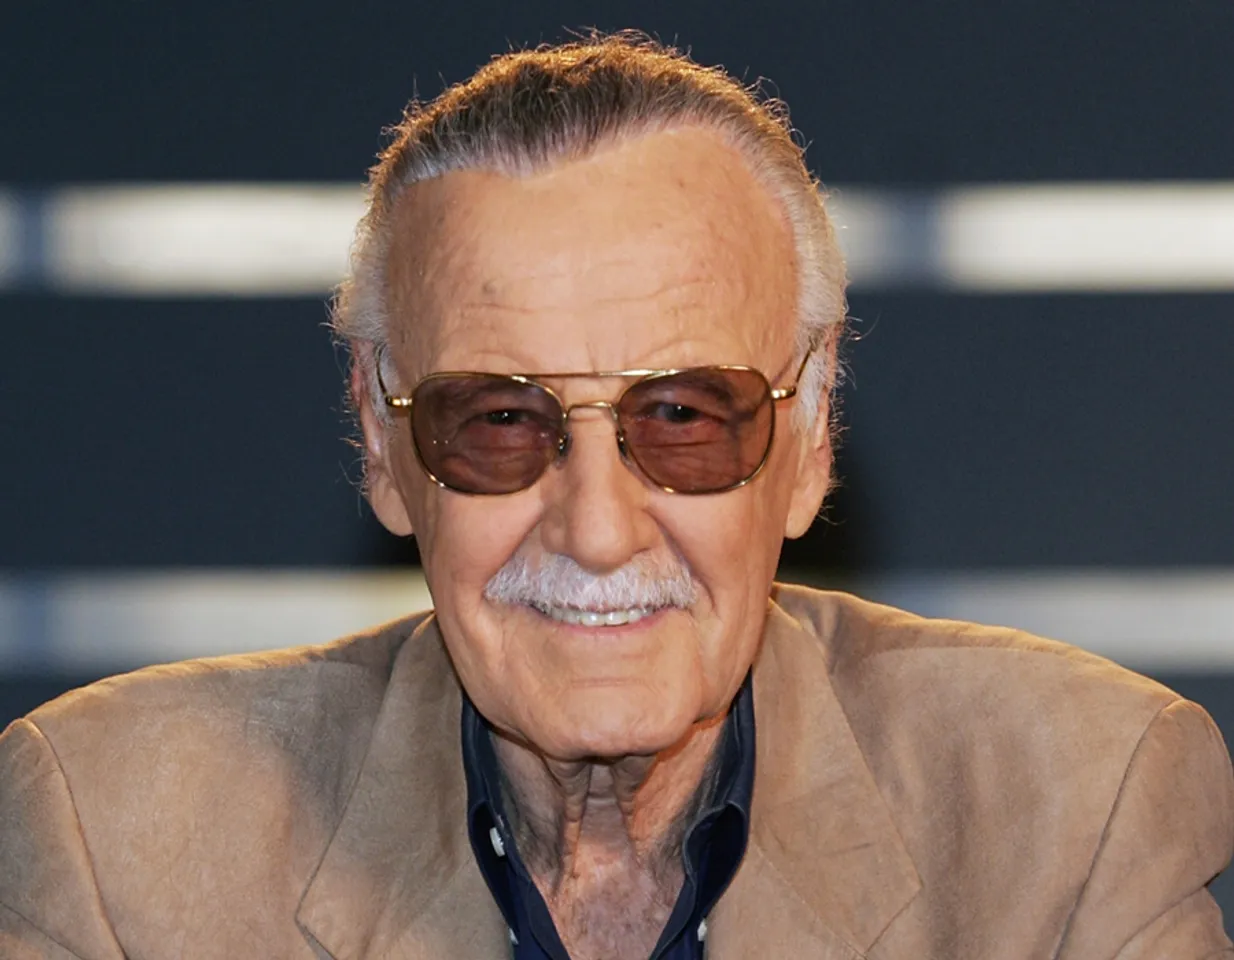 STAN LEE HONOURED WITH A HAND-PRINT CEREMONY